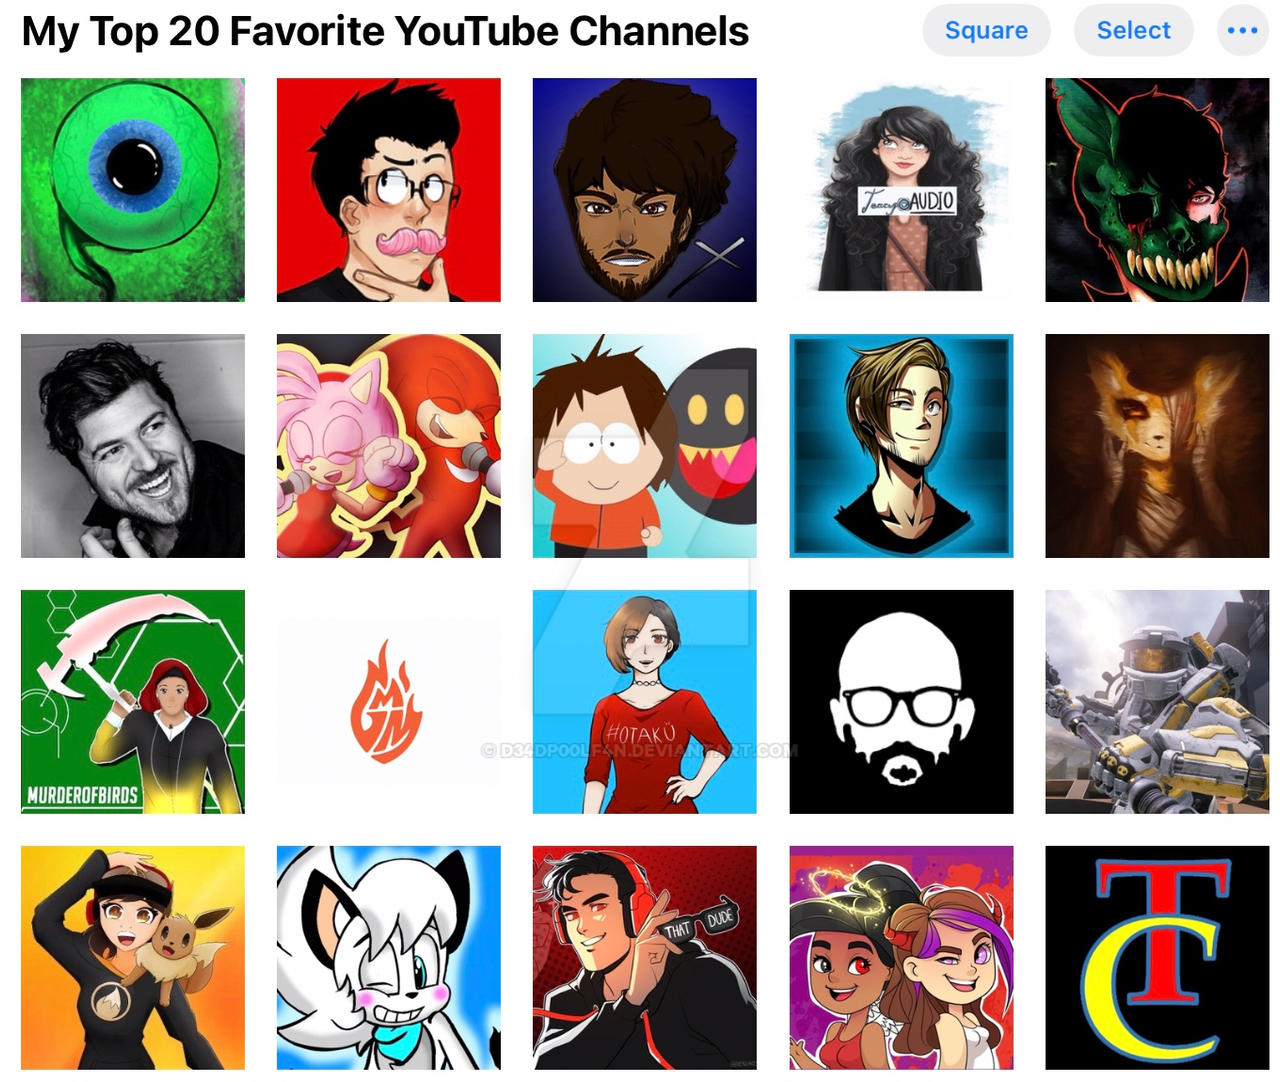 My Top 20 Favorite YouTube Channels (UPDATED) by D34DP00LF4N on DeviantArt